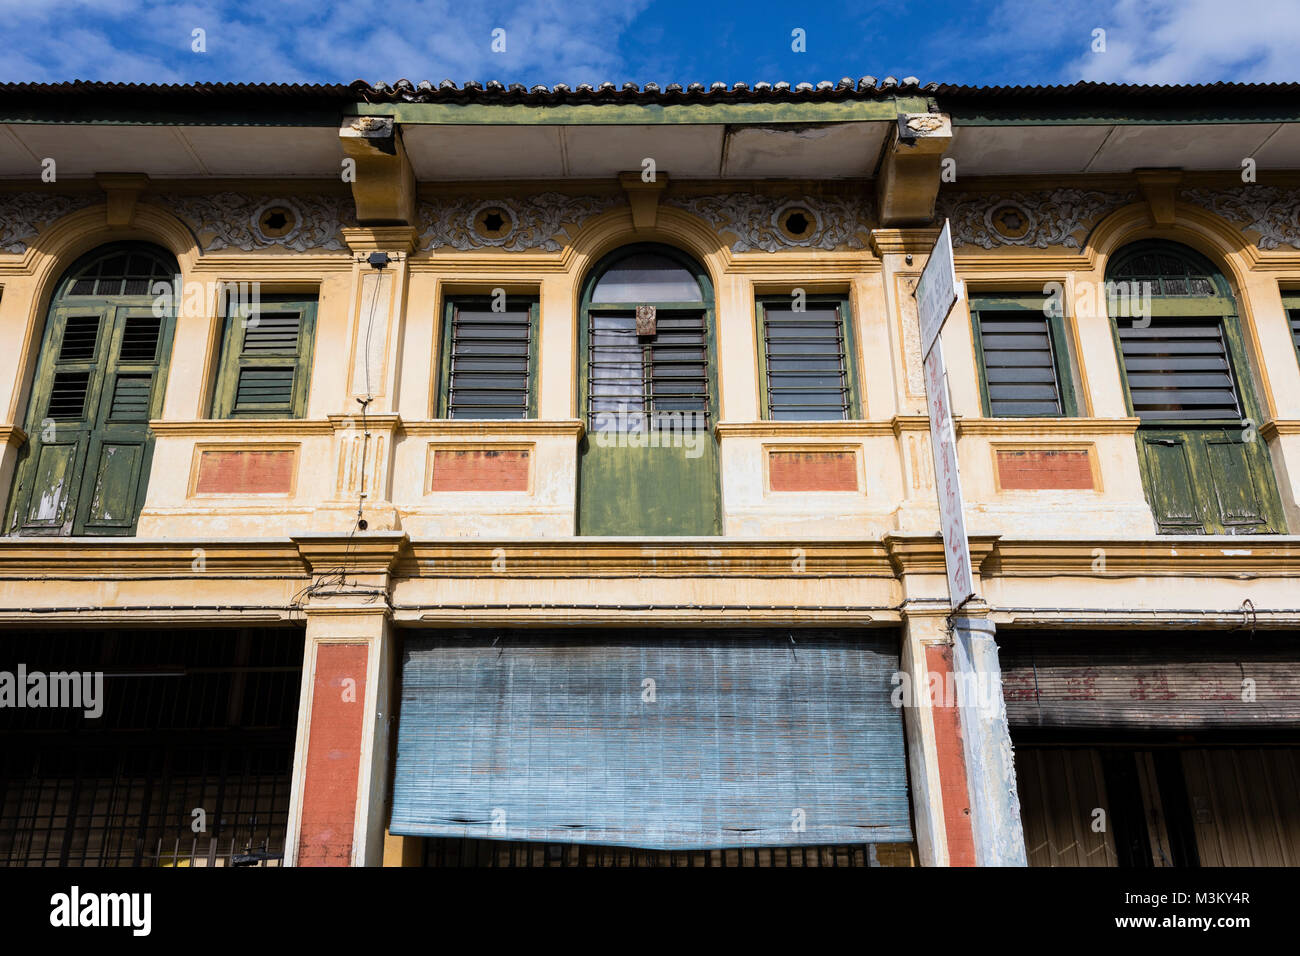 George Town, Malaysia, December 19 2017: Facade of the old building located in UNESCO Heritage Zone, Penang in Malaysia Stock Photo